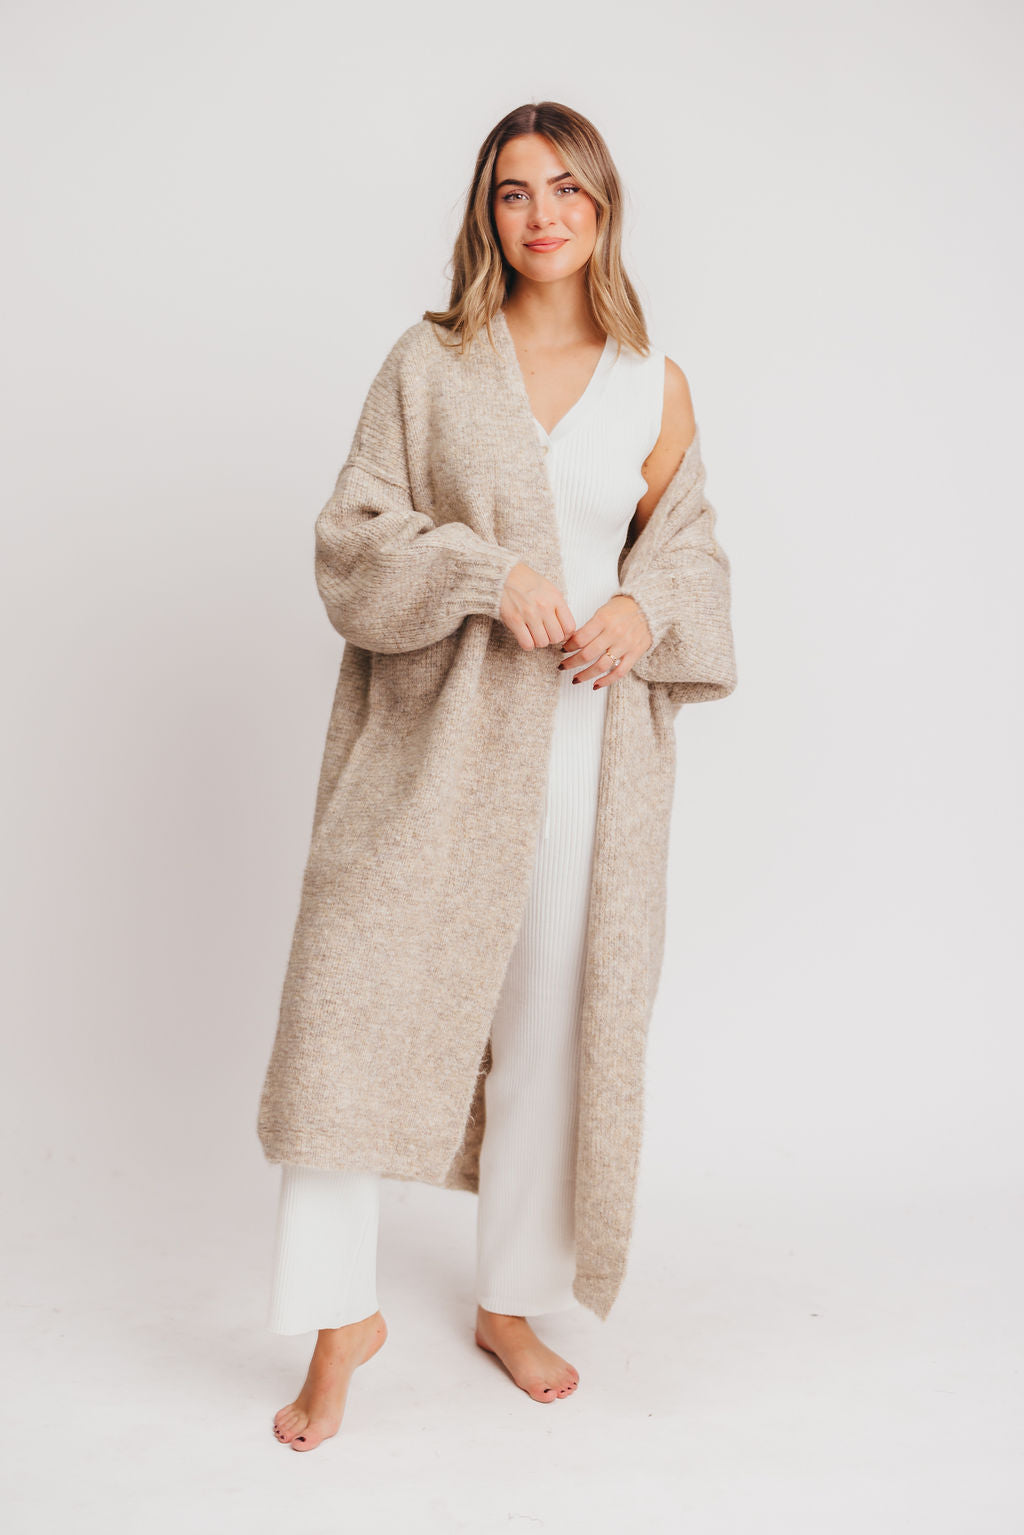 Oversized Edge Worth Cardigan Collective Amelia in – Oatmeal Rolled